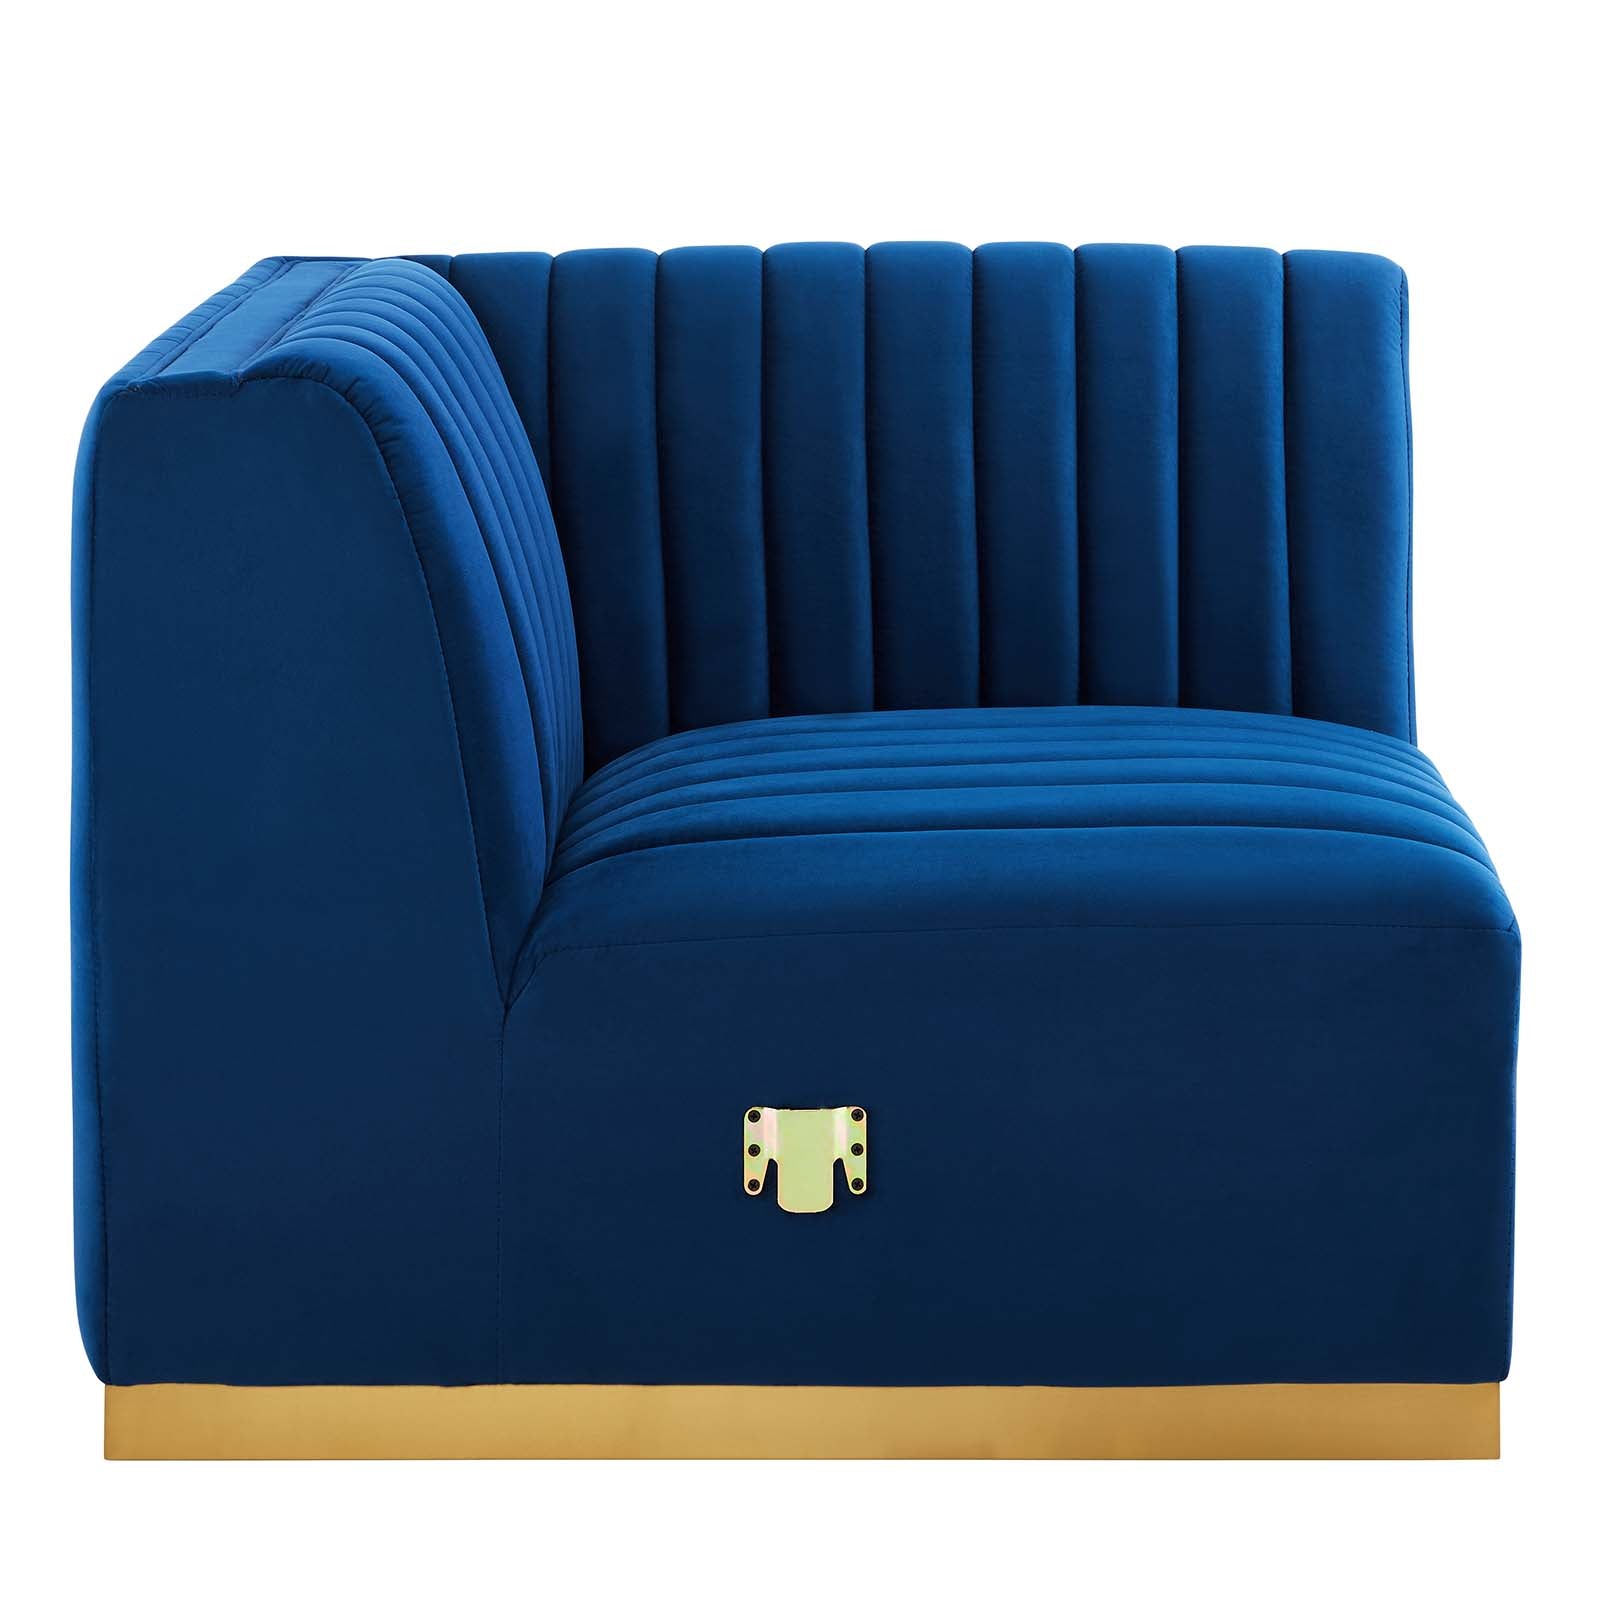 Modway Sectional Sofas - Conjure Channel Tufted Performance Velvet 5 Piece Sectional Gold Navy